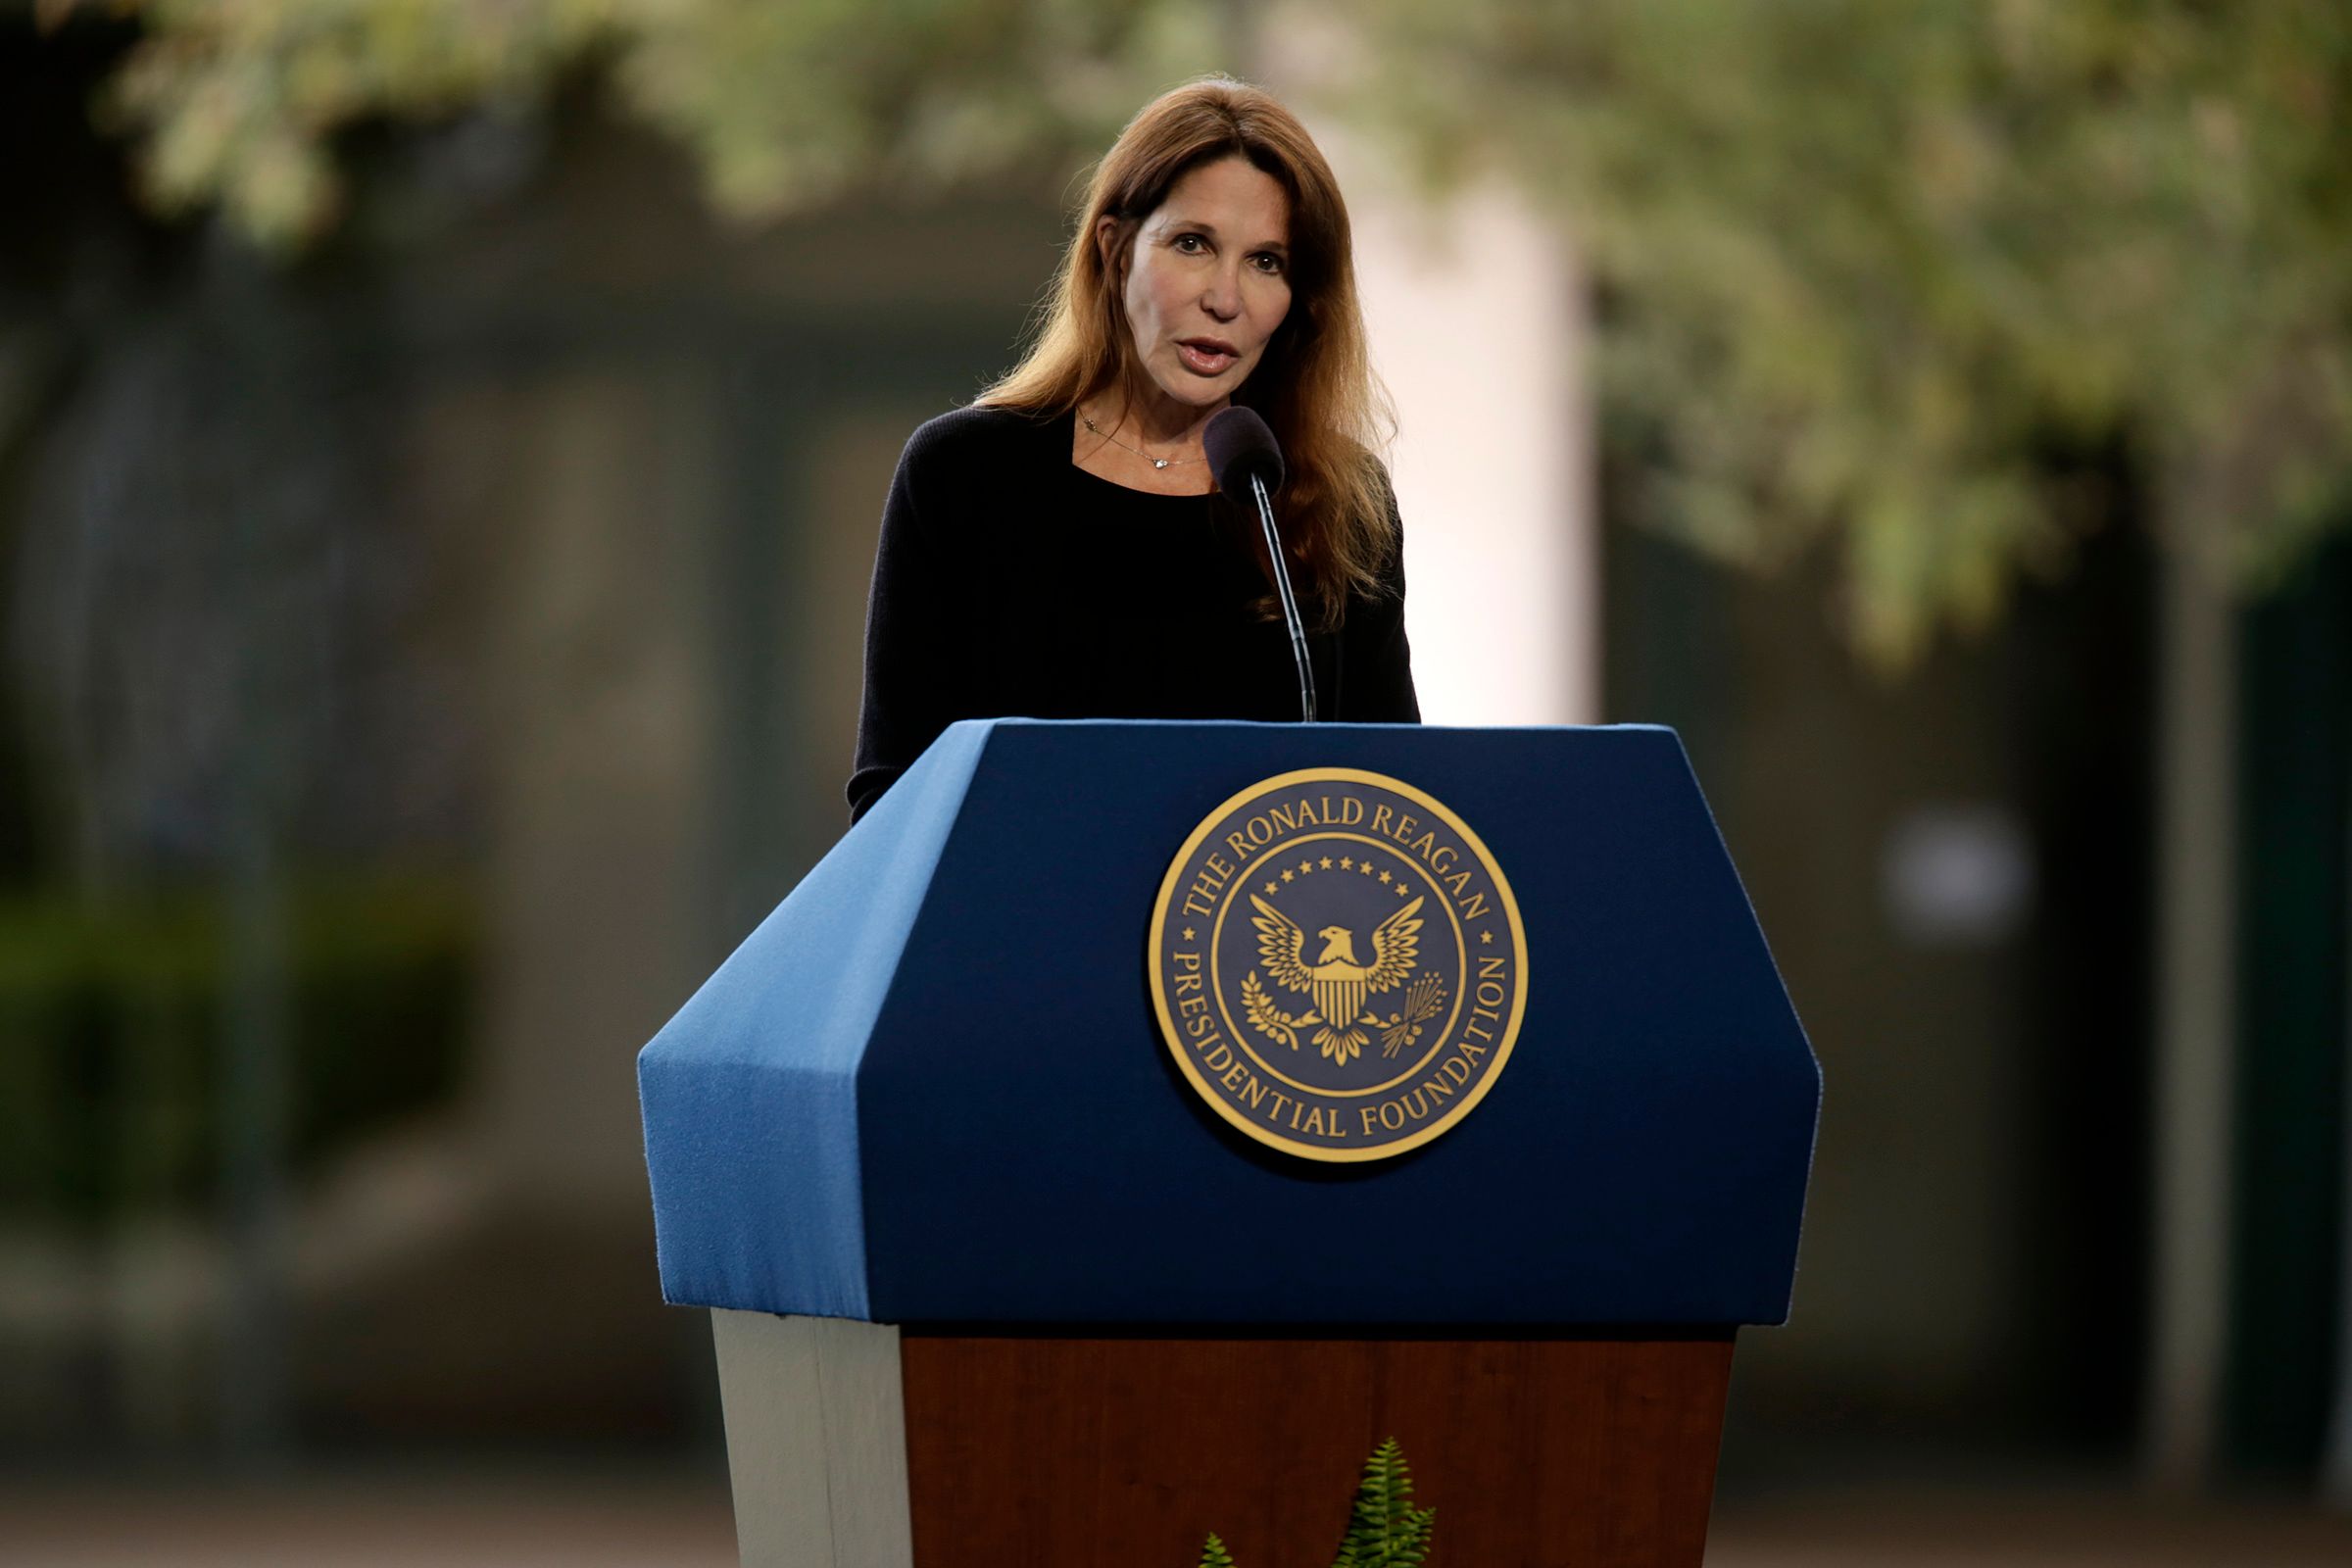 Patti Davis spoke at the funeral of her mother and former First Lady Nancy Reagan at the Ronald Reagan Presidential Library March 11, 2016 in Simi Valley, California | Photo: Getty Images